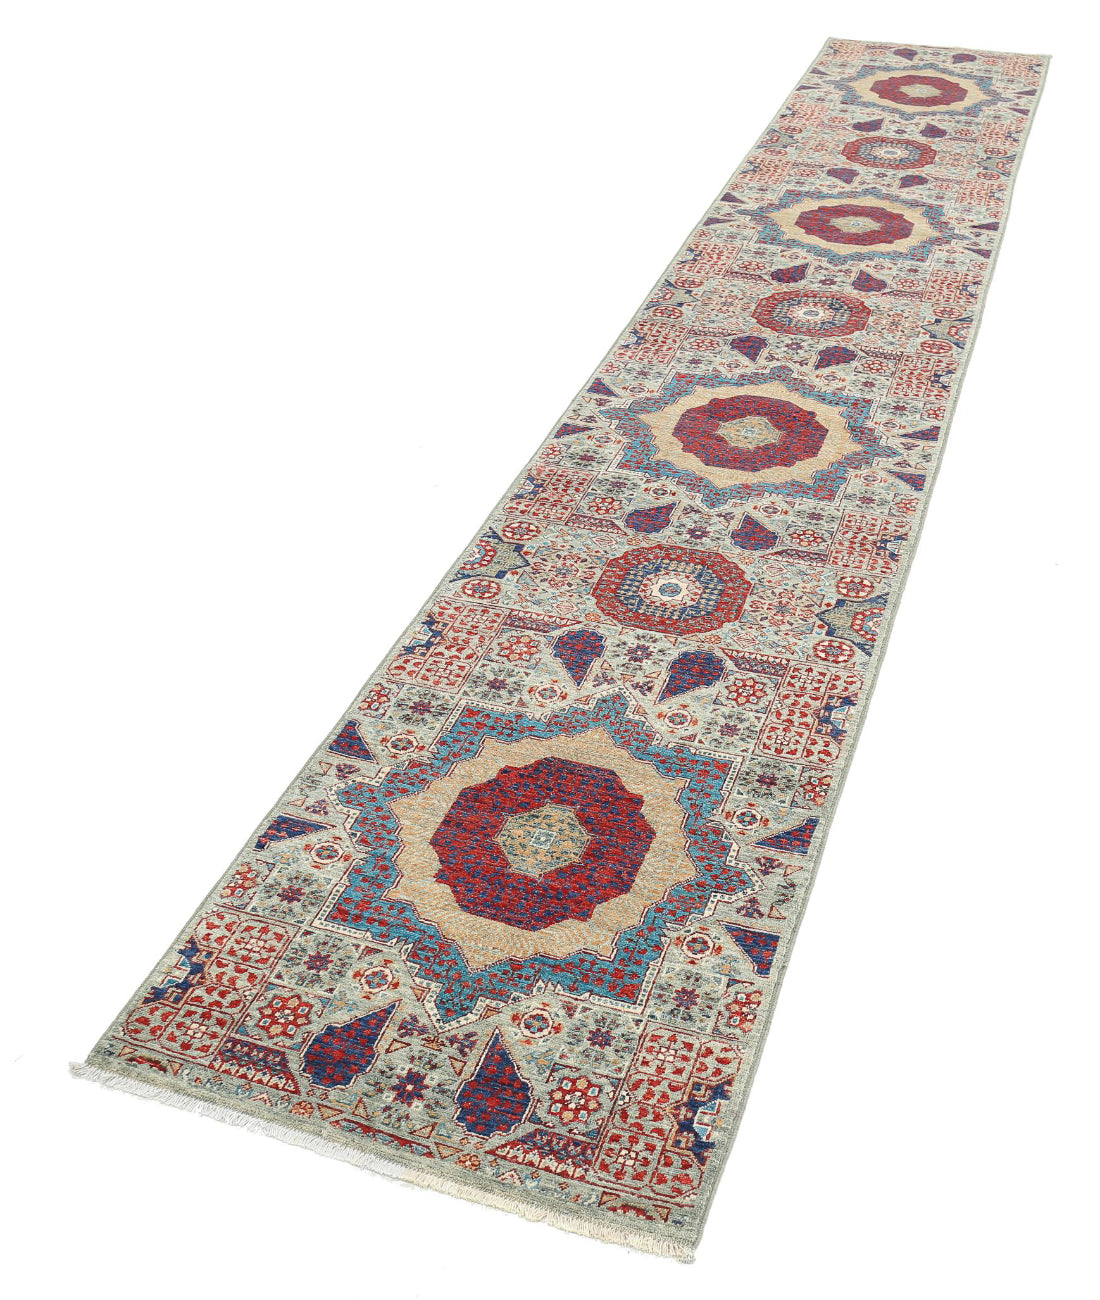 Hand Knotted Mamluk Wool Rug - 2'5'' x 14'6'' 2'5'' x 14'6'' (73 X 435) / Green / Red